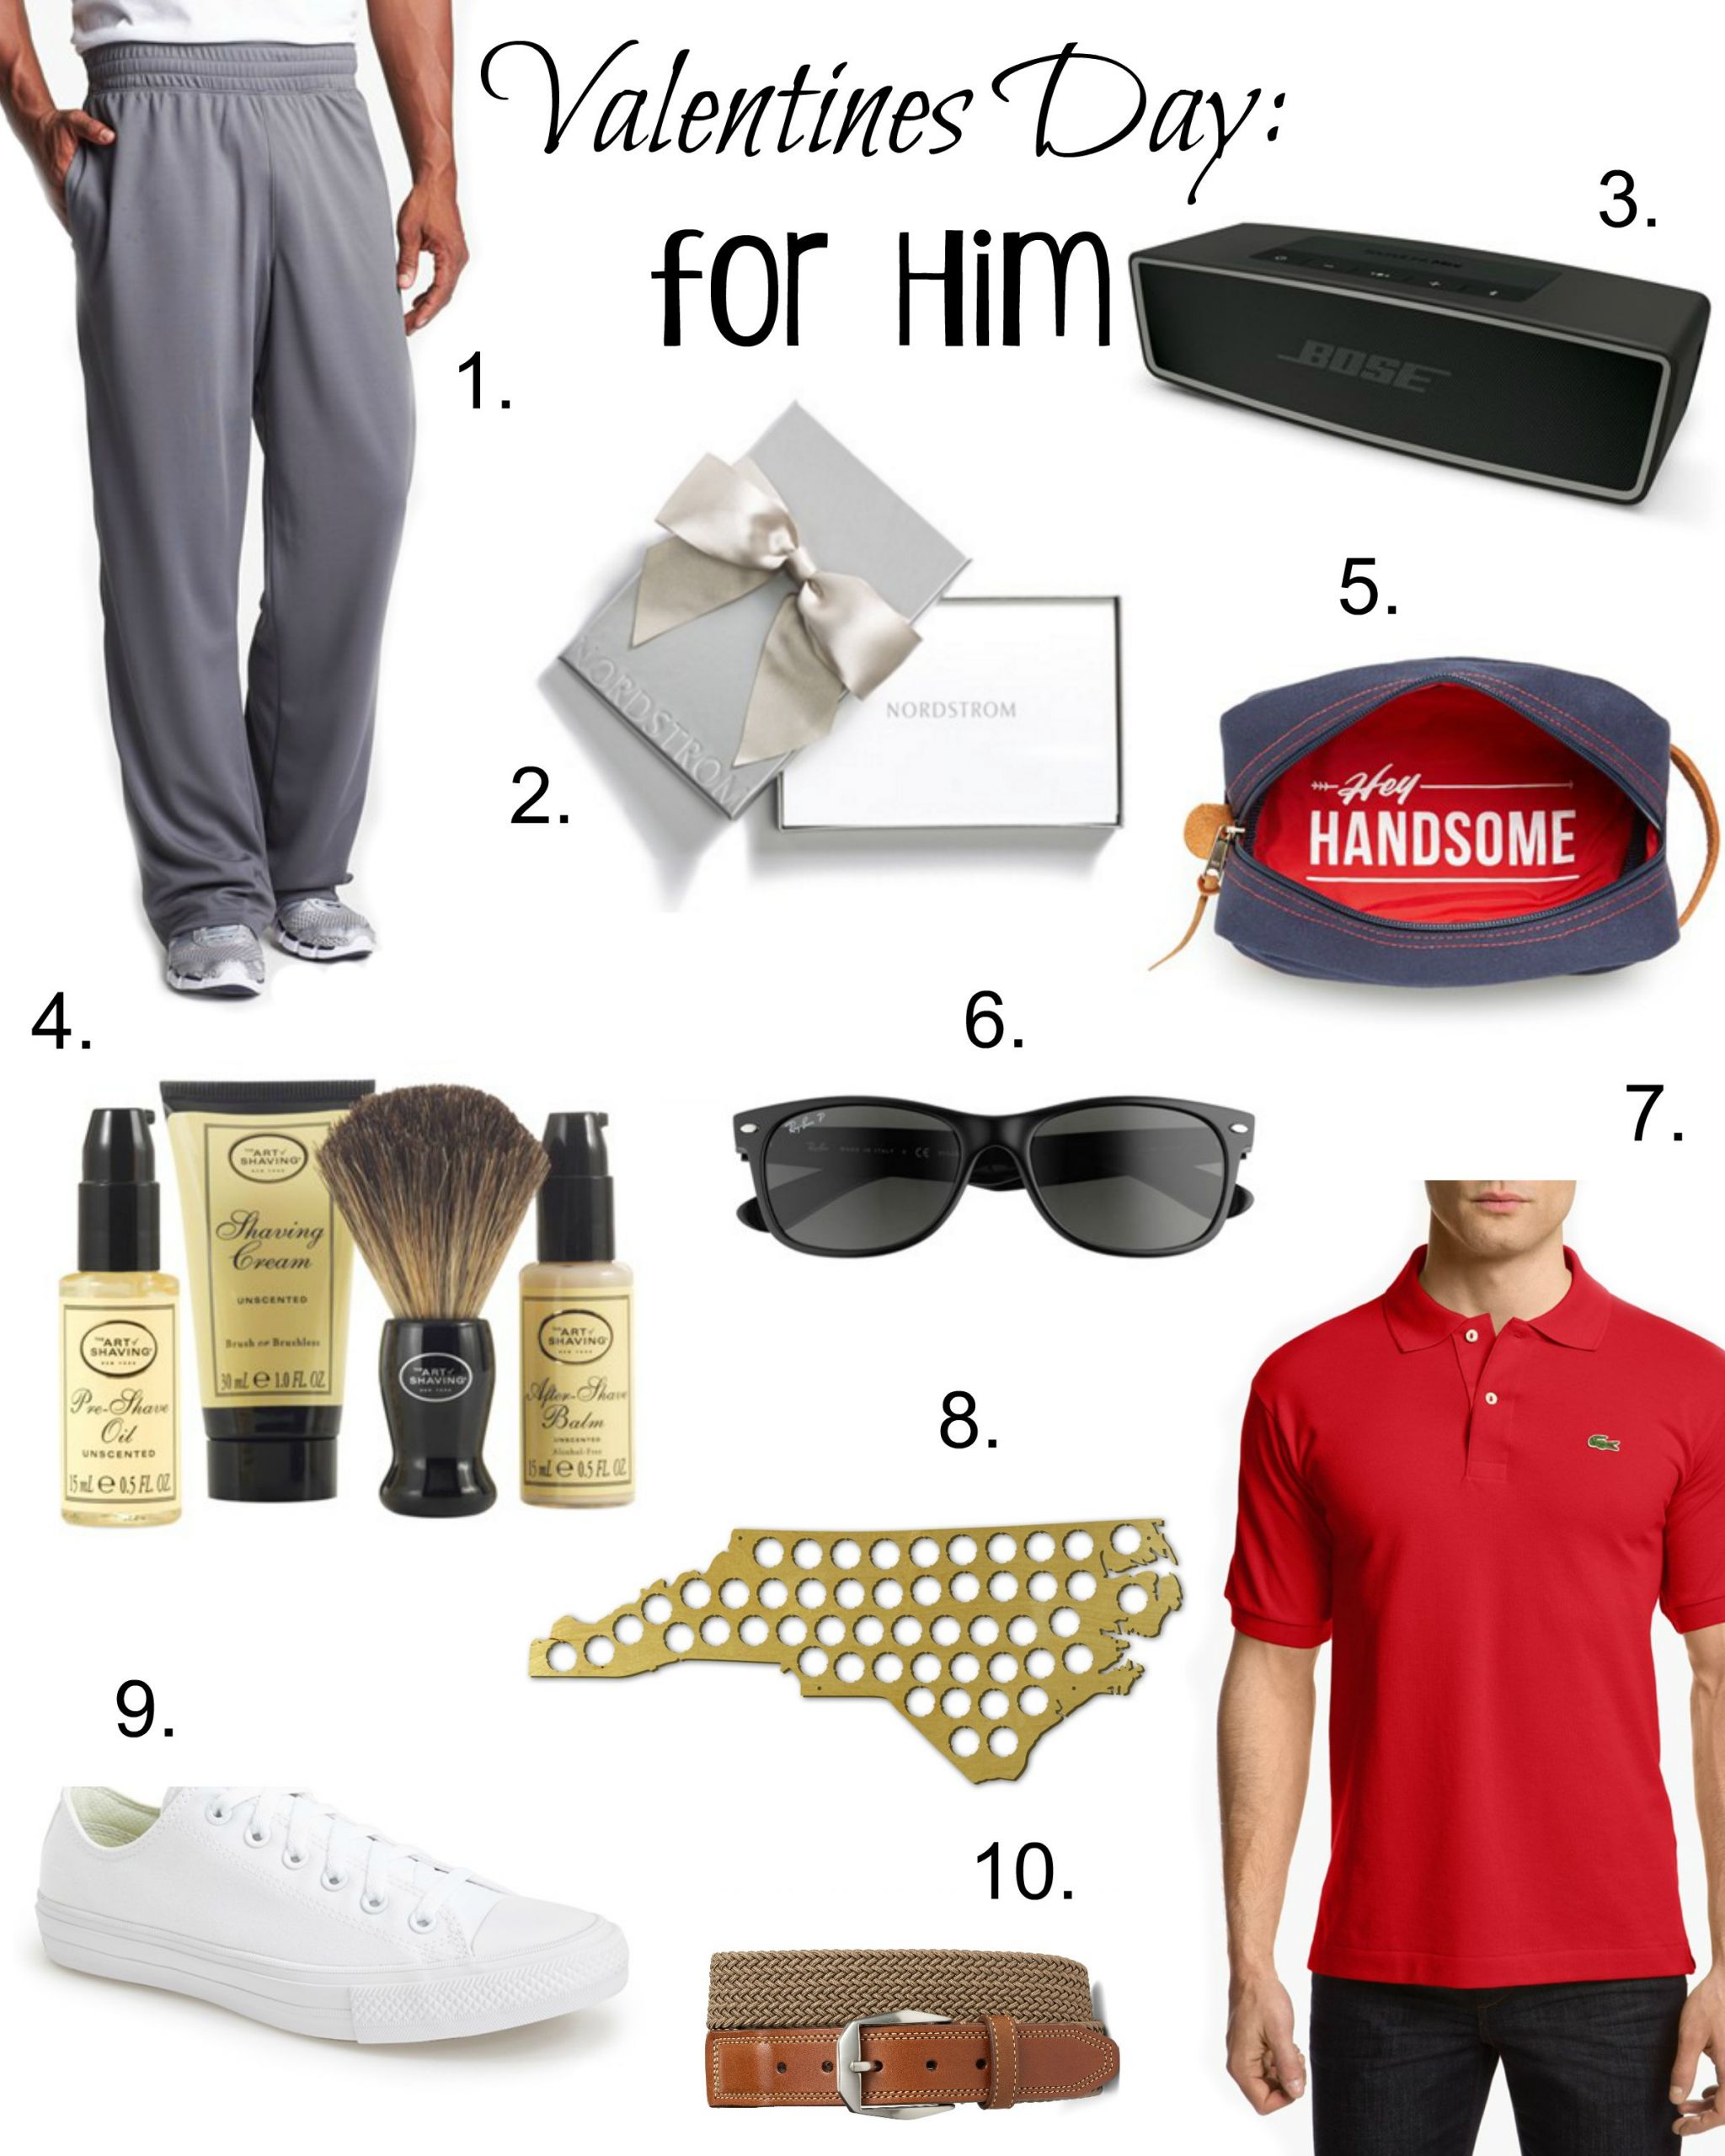 Valentines Day Gifts For Him Pinterest
 Top 10 Valentines Day Gifts For Him